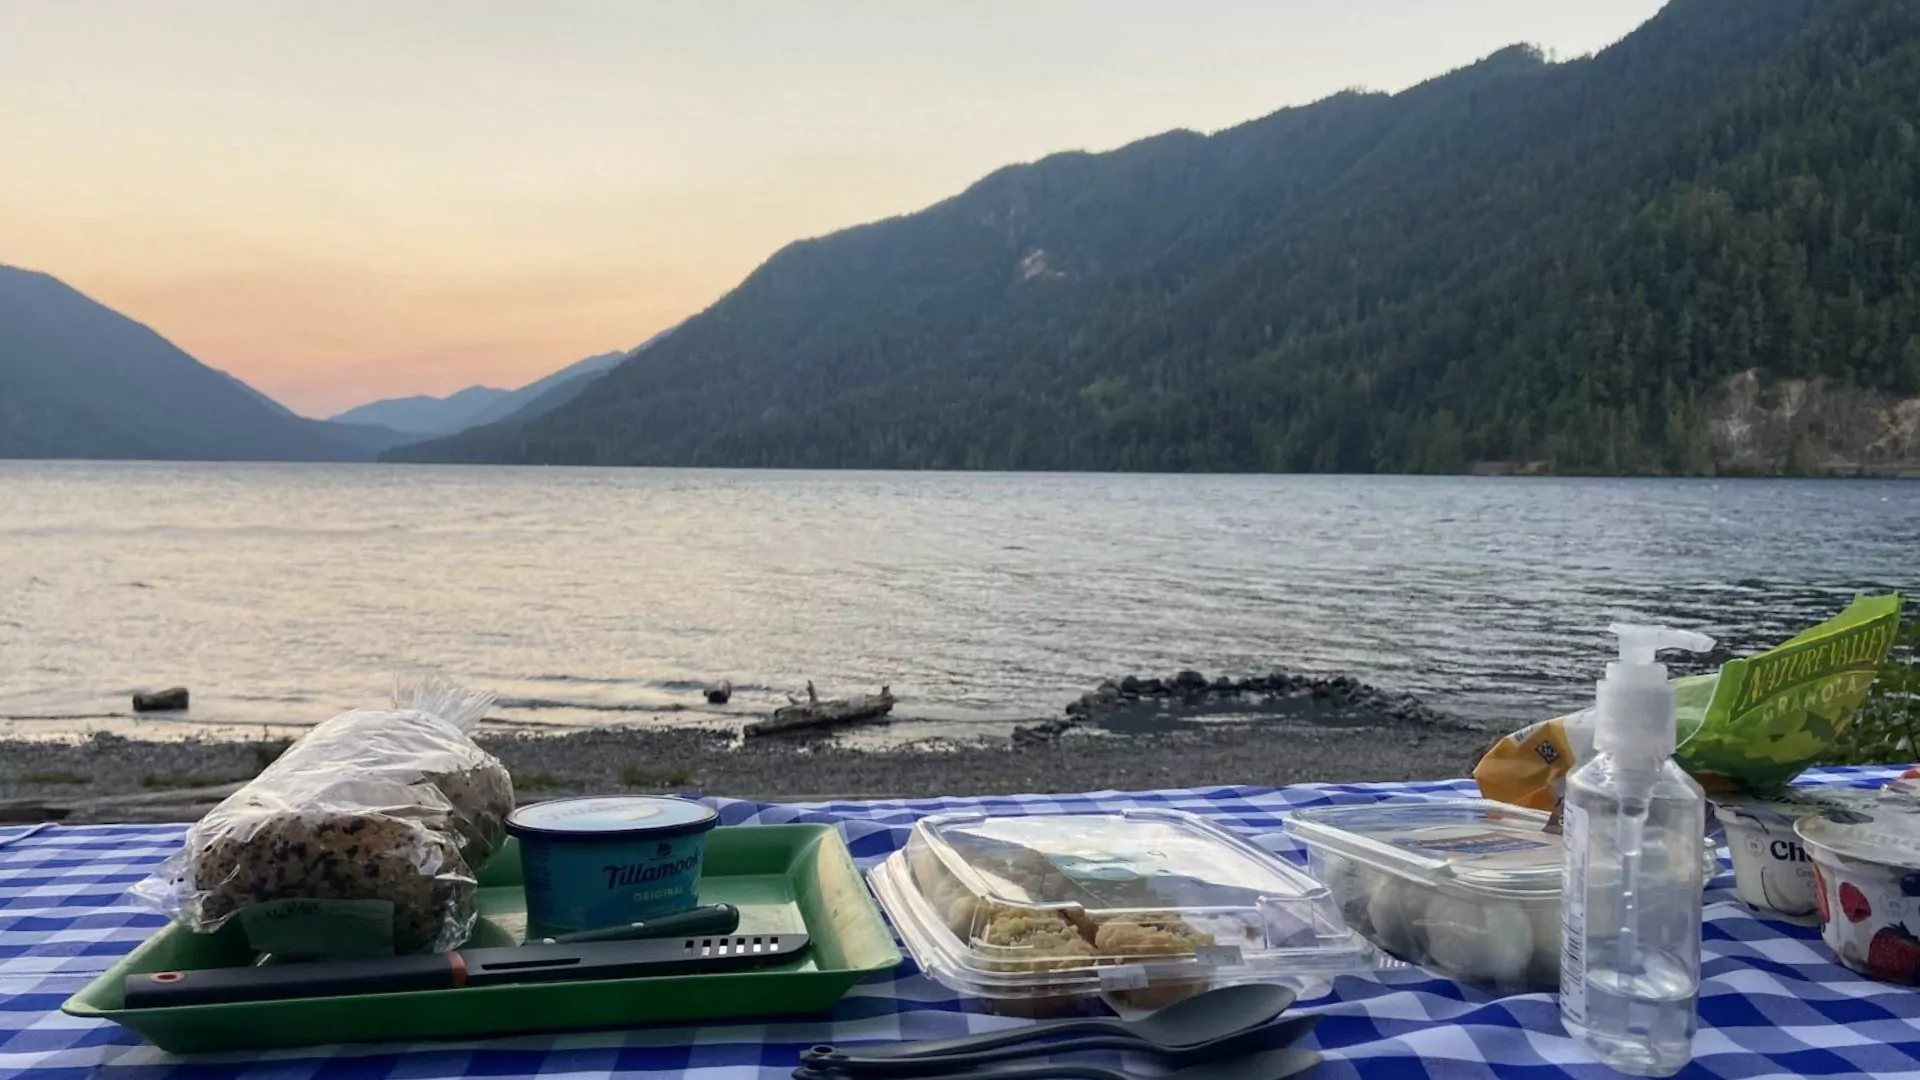 Picnic spread on table beside the shore at dawn